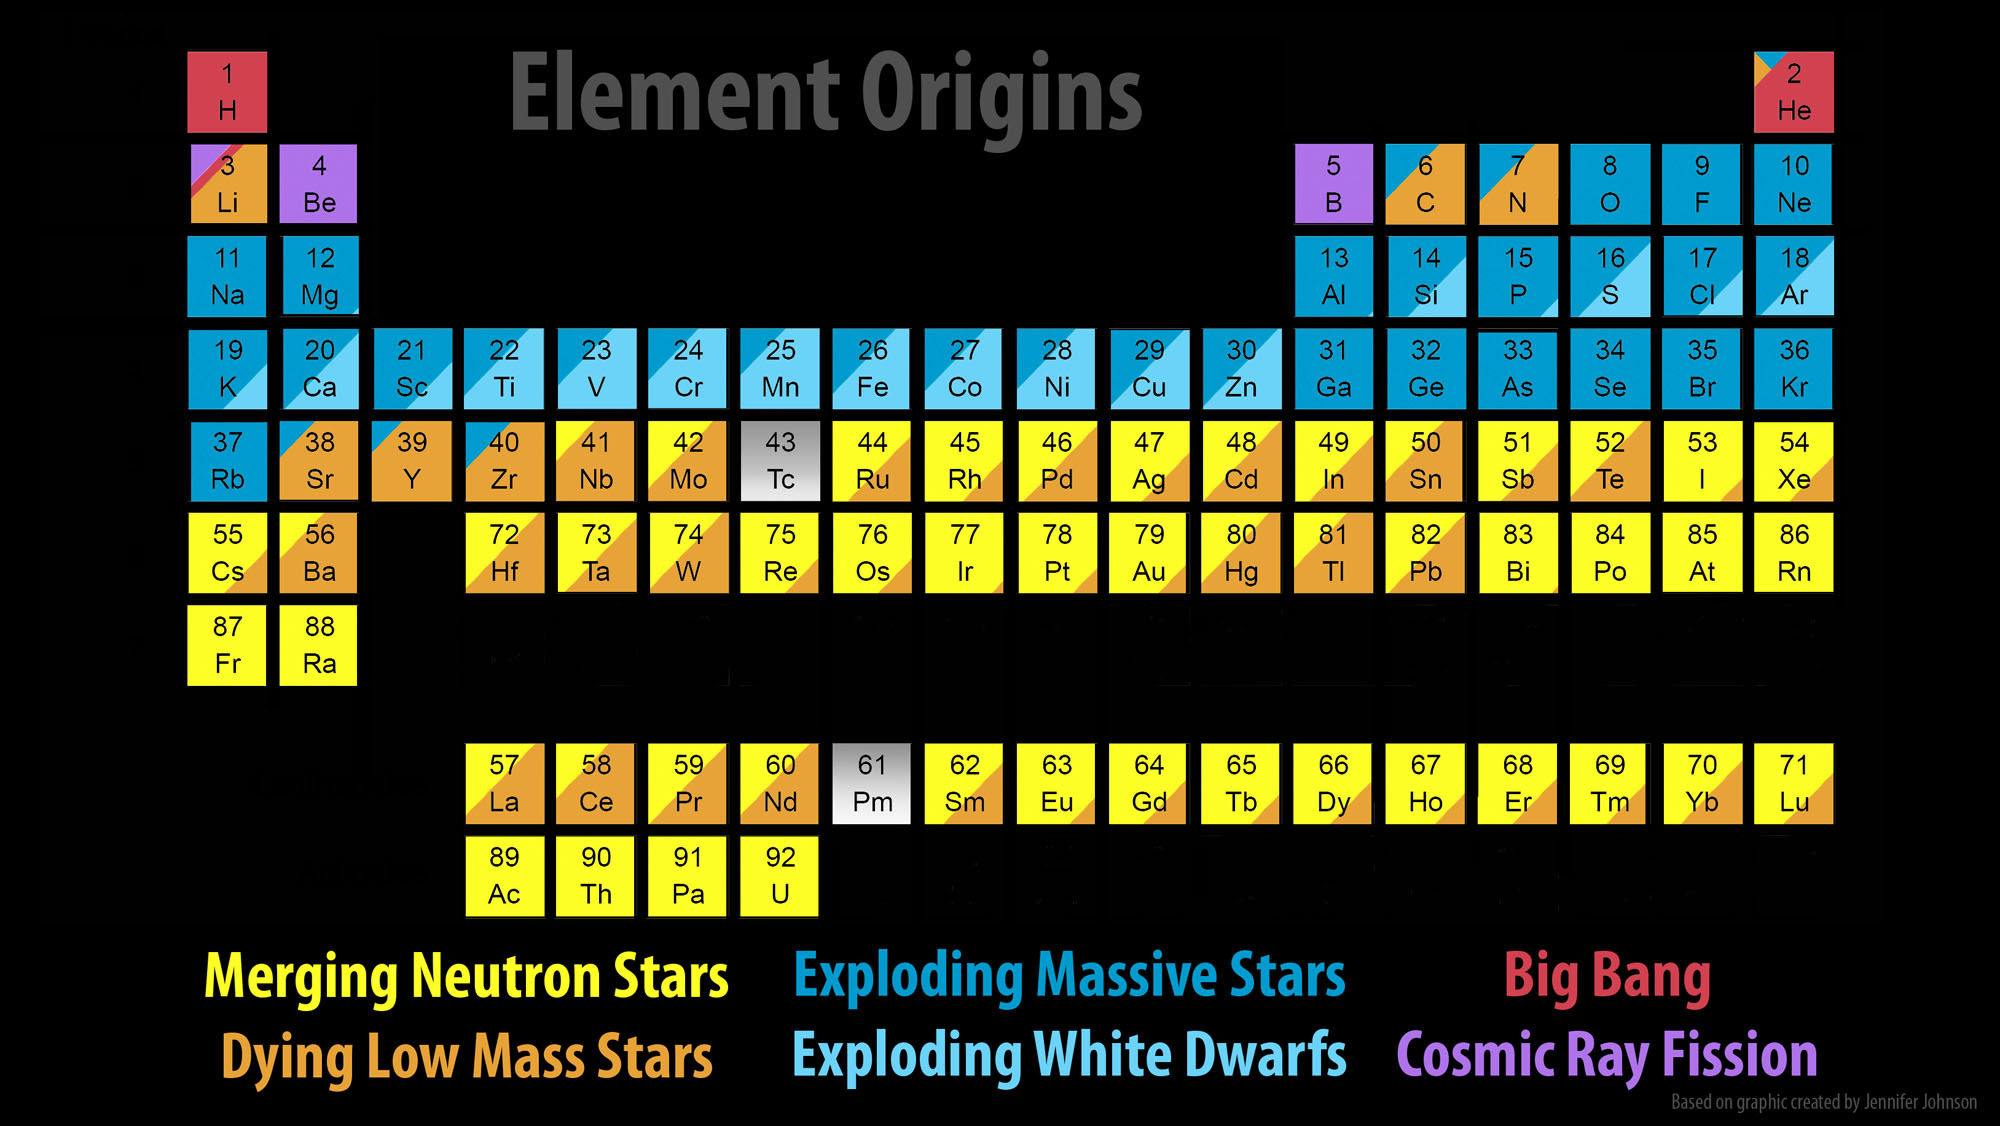 Periodic table indicating which elements originate in neutron star mergers